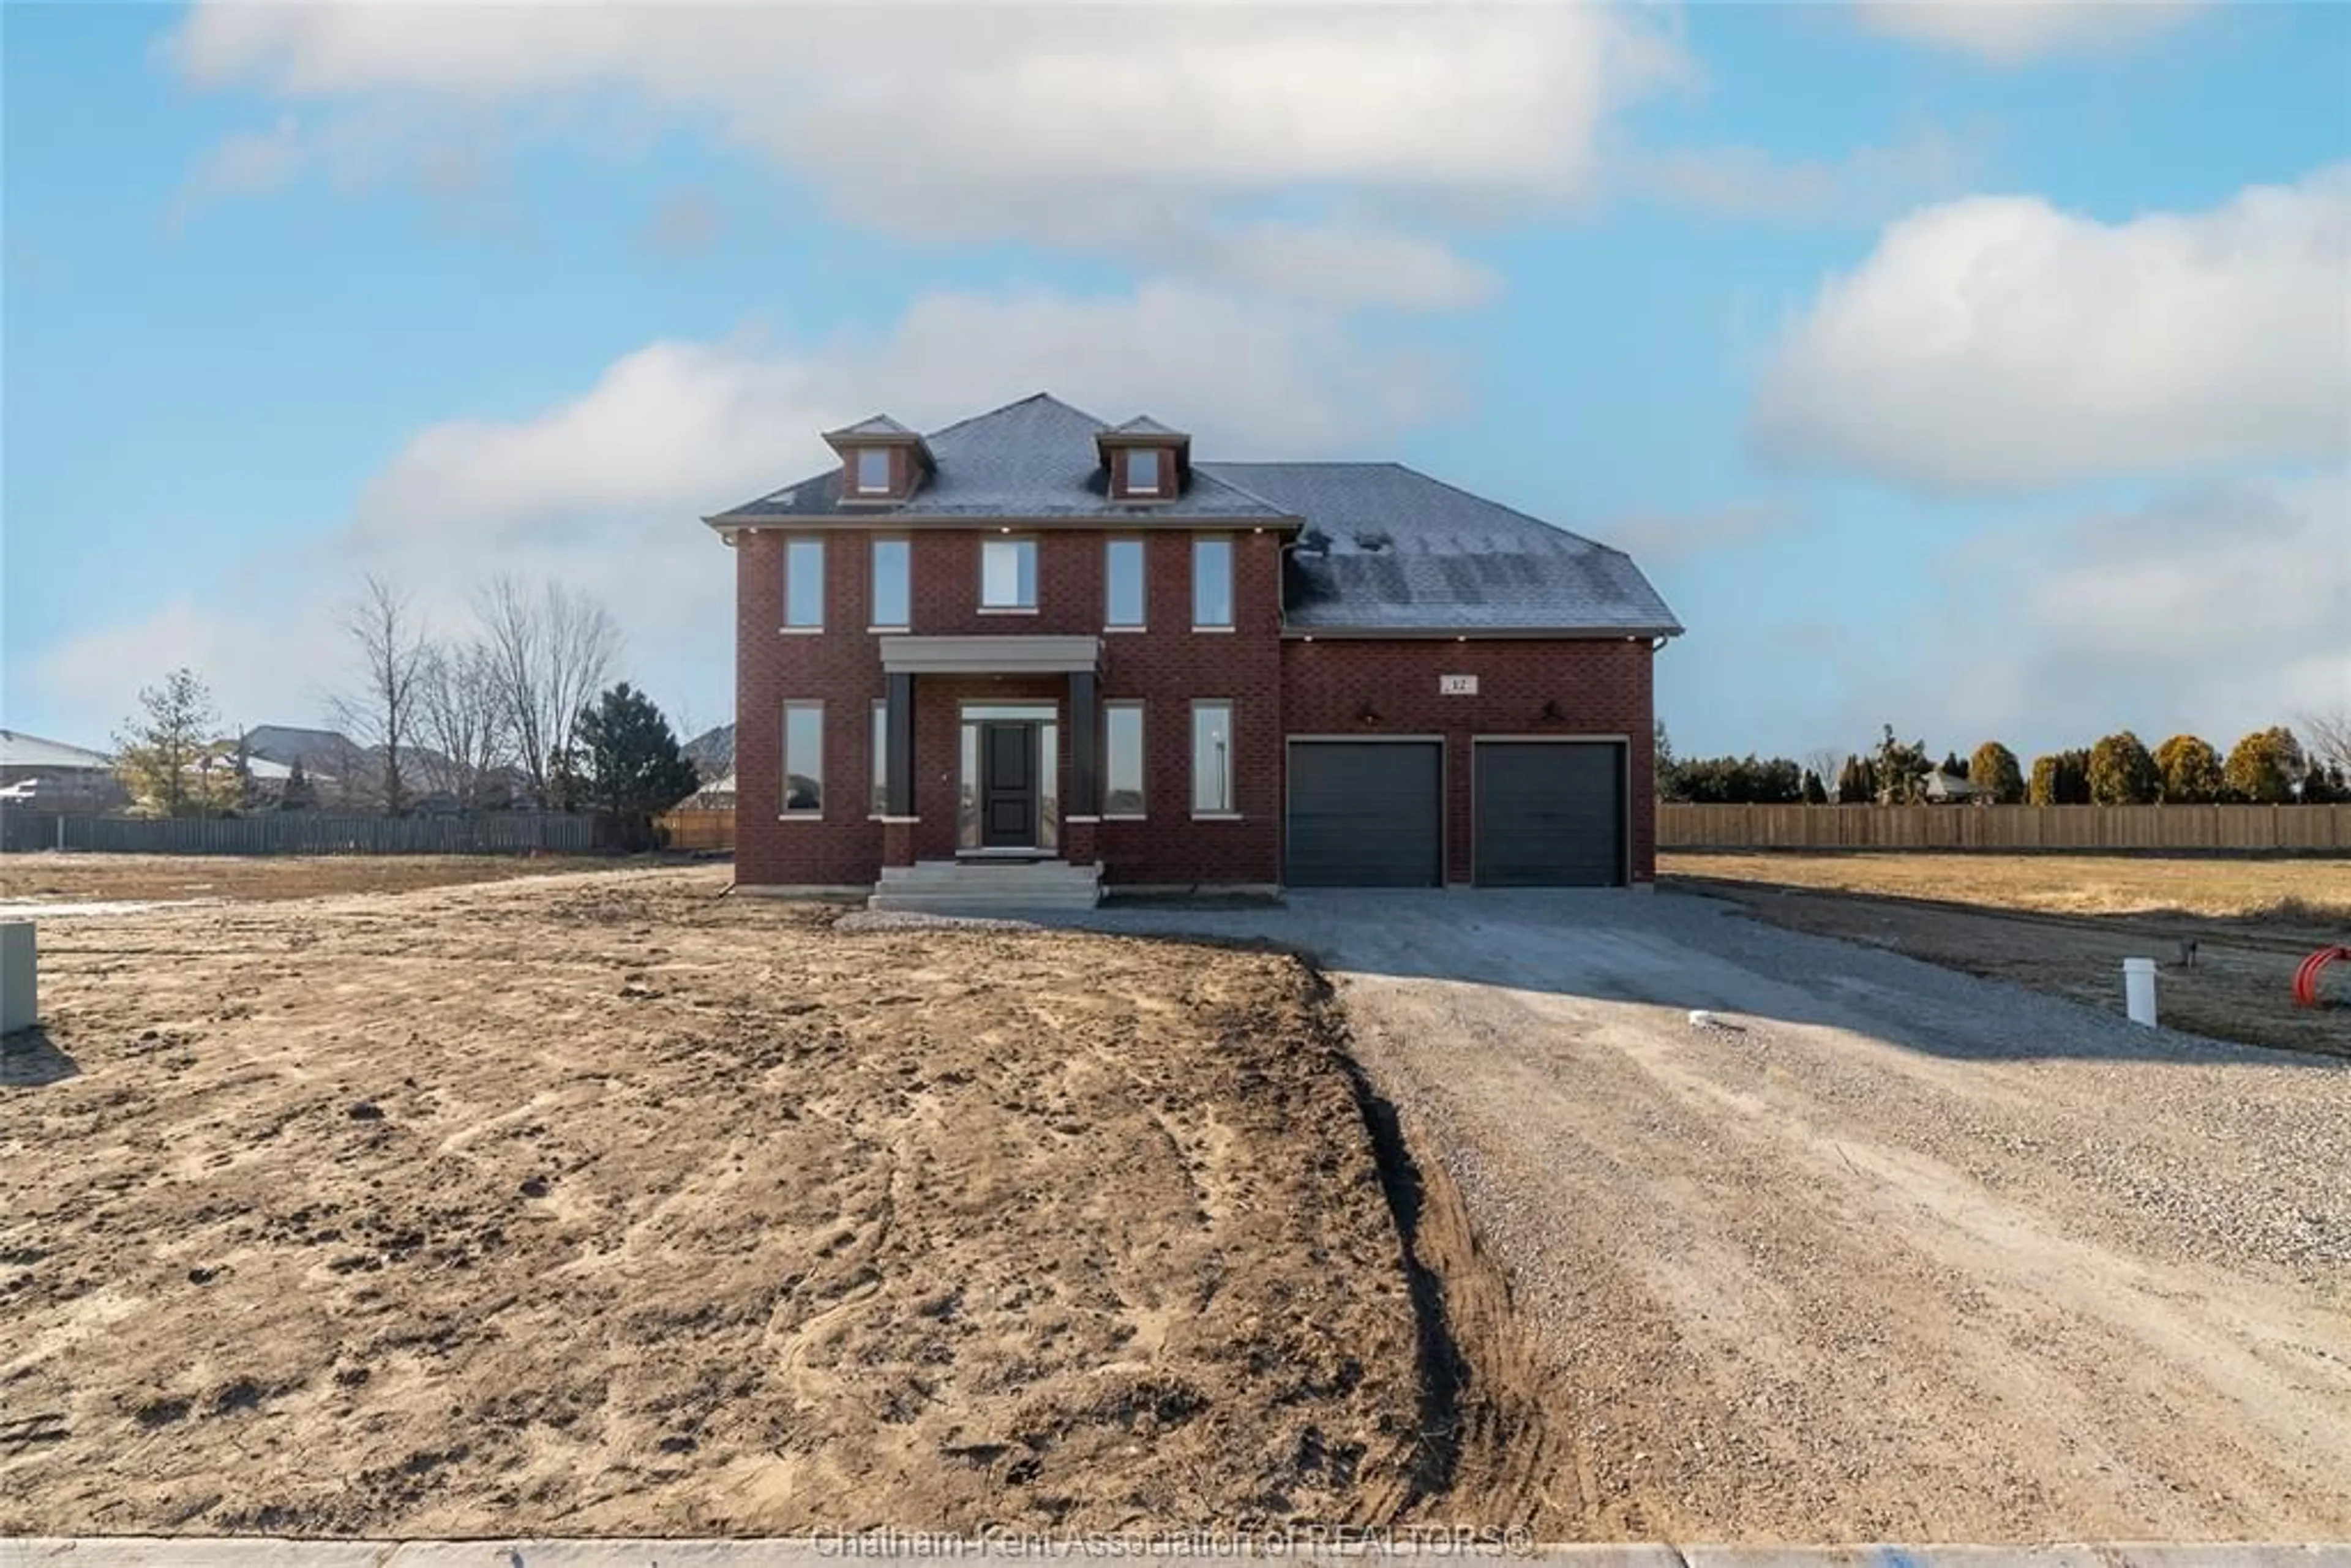 Home with brick exterior material for Lot 4 Bloomington Way, Chatham Ontario N7L 0H1